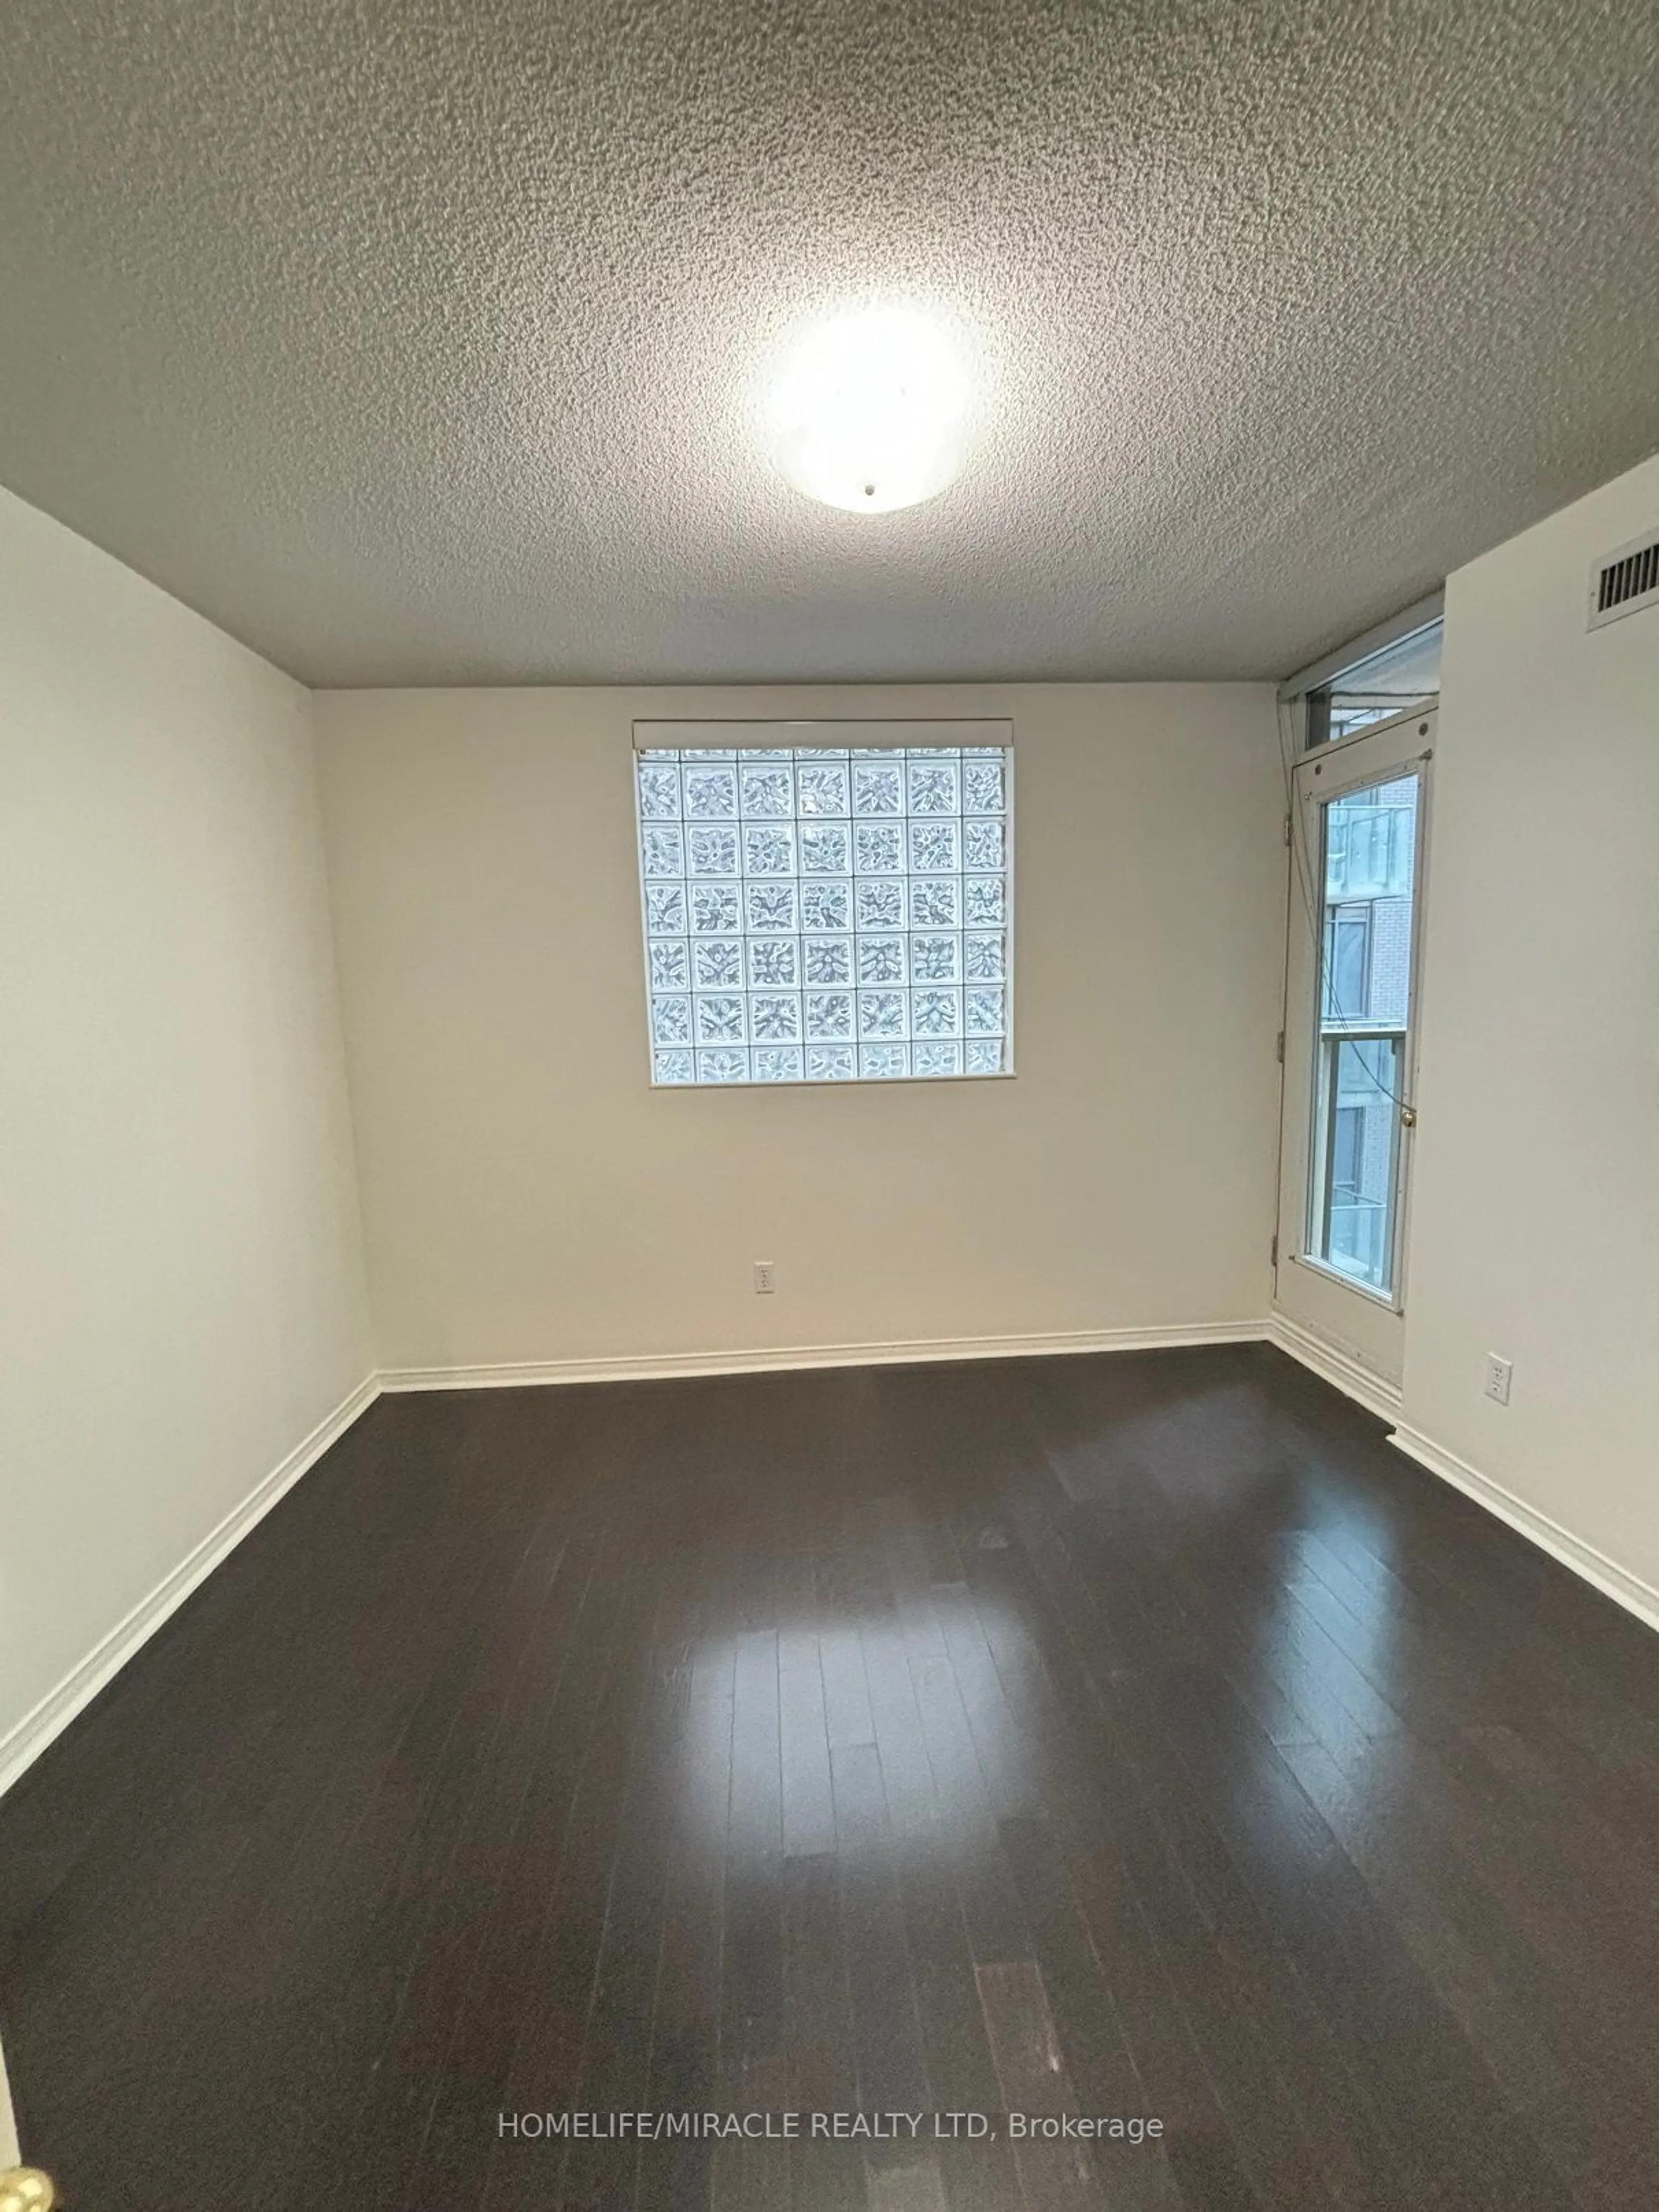 A pic of a room for 750 Bay St #2210, Toronto Ontario M5G 1N6